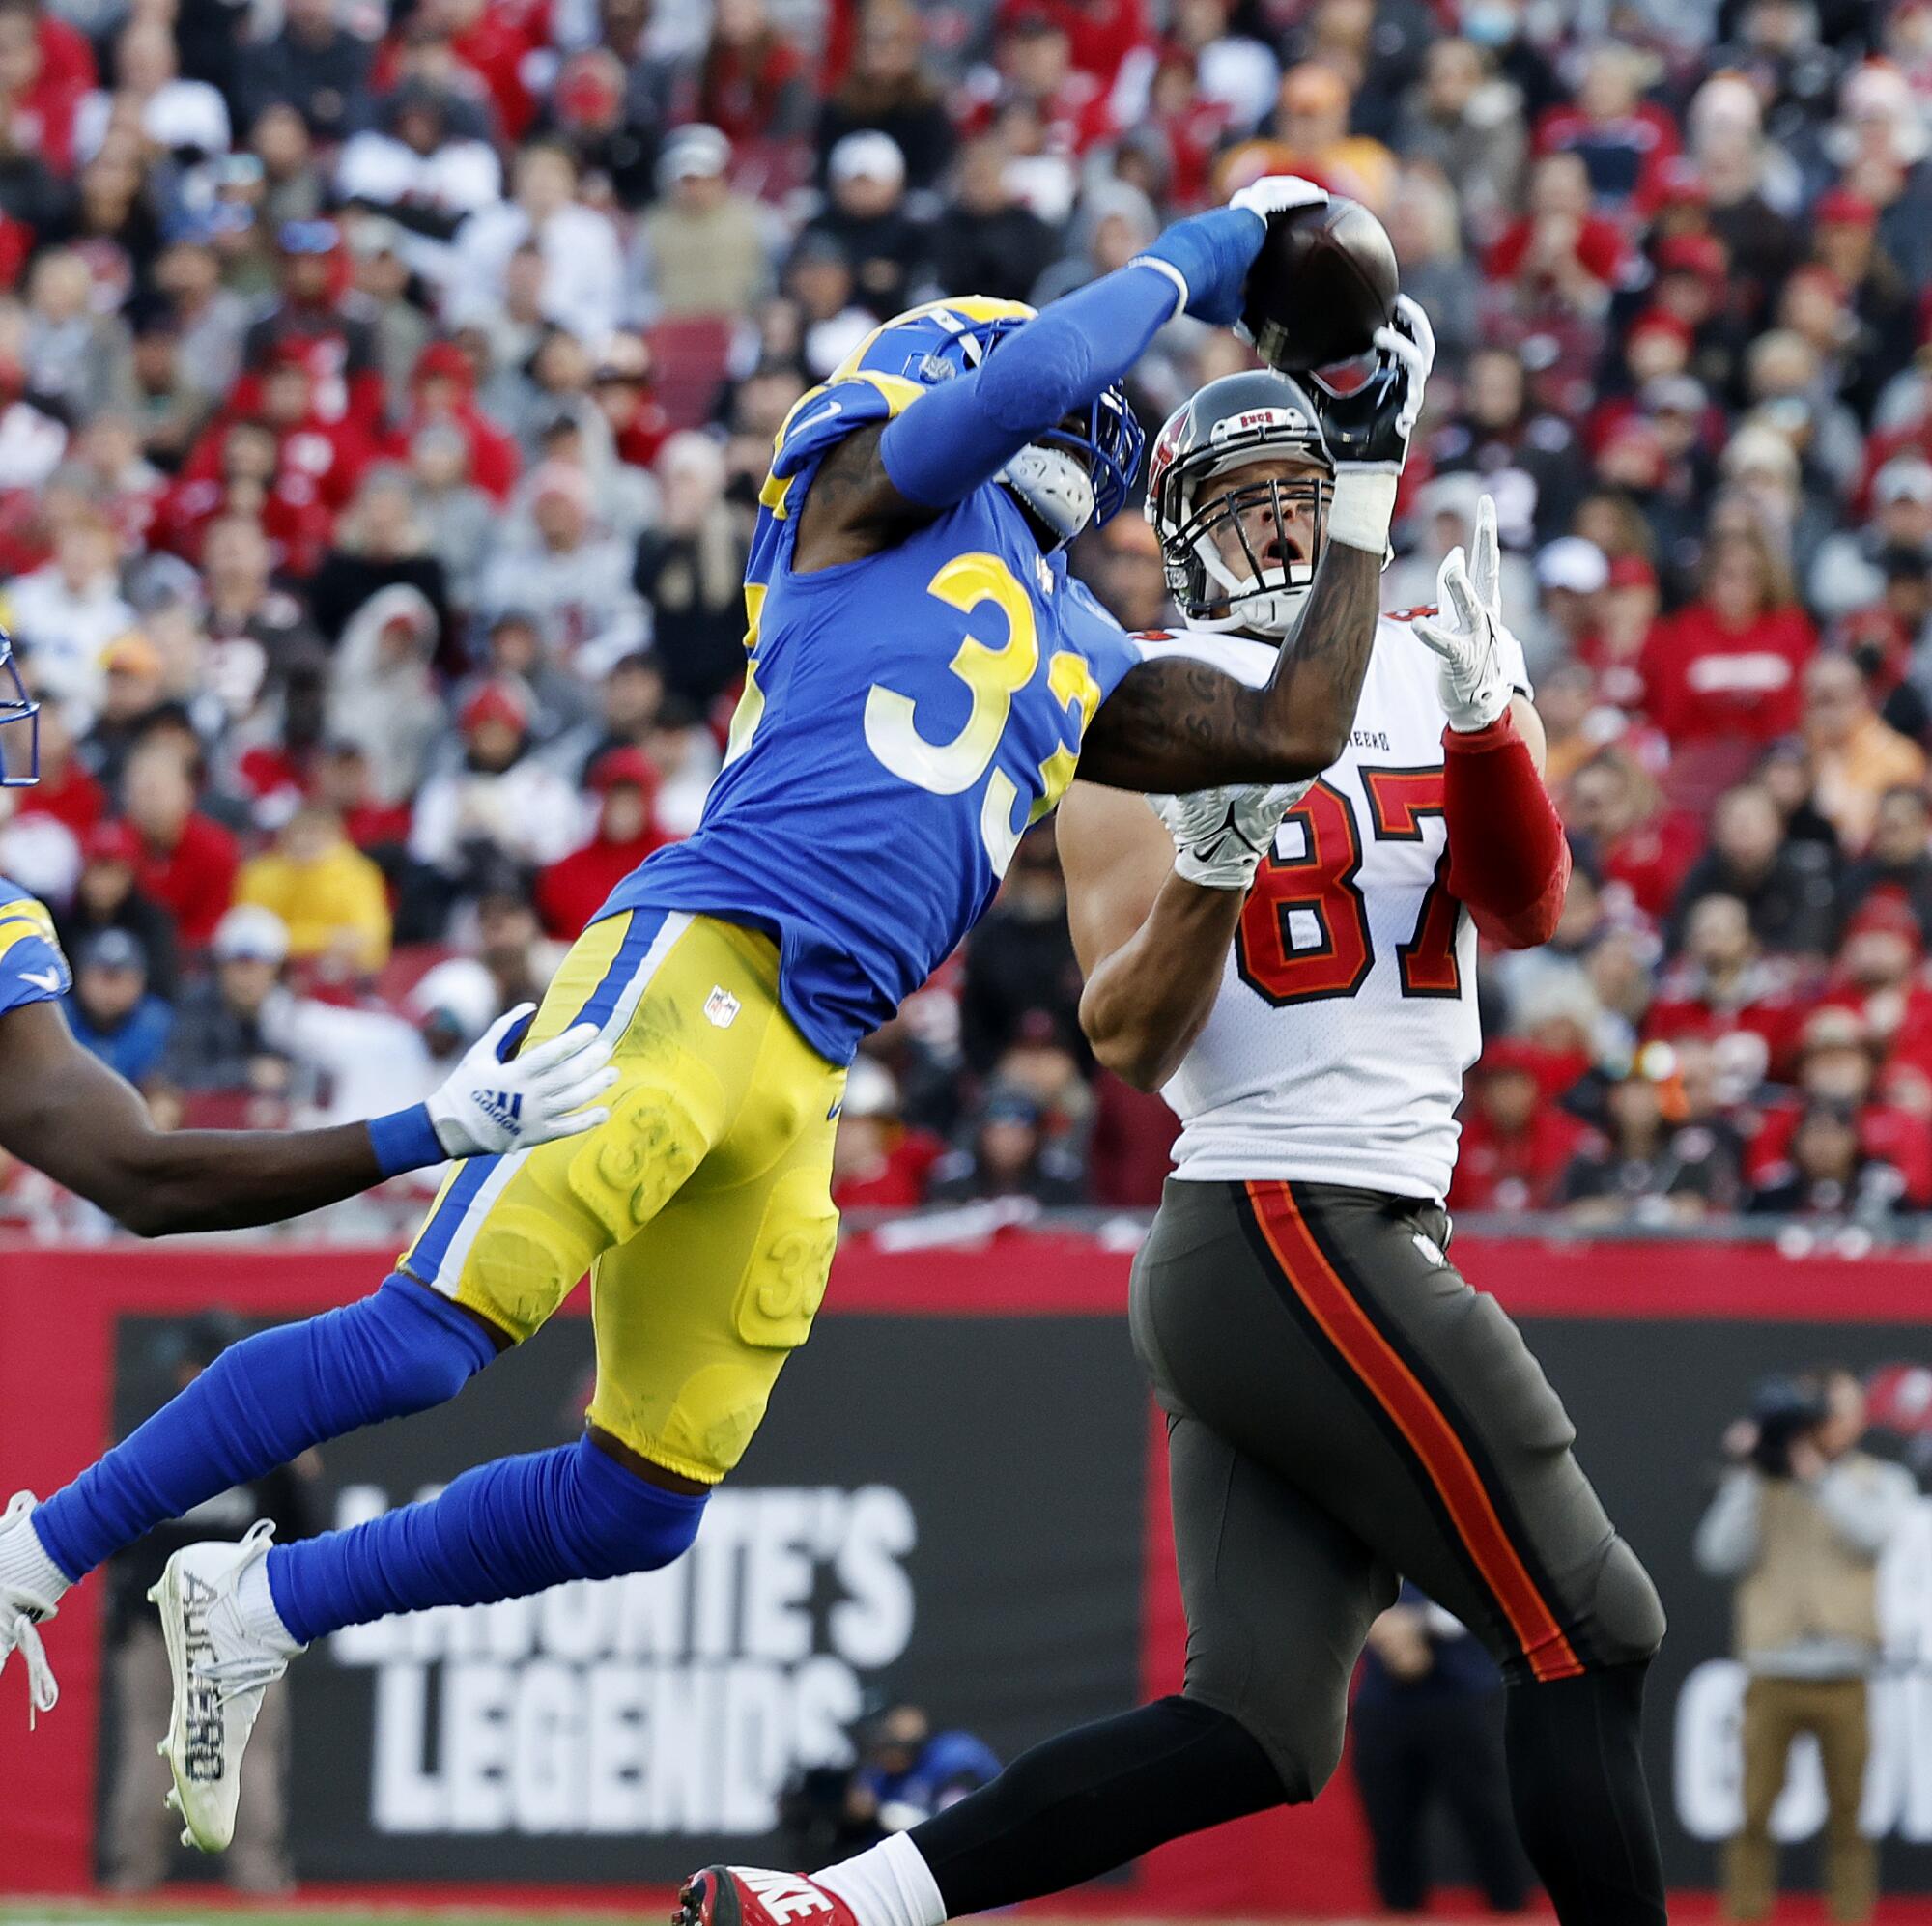 Rams safety Nick Scott, left, intercepts a pass intended for Tampa Bay Buccaneers tight end Rob Gronkowski.